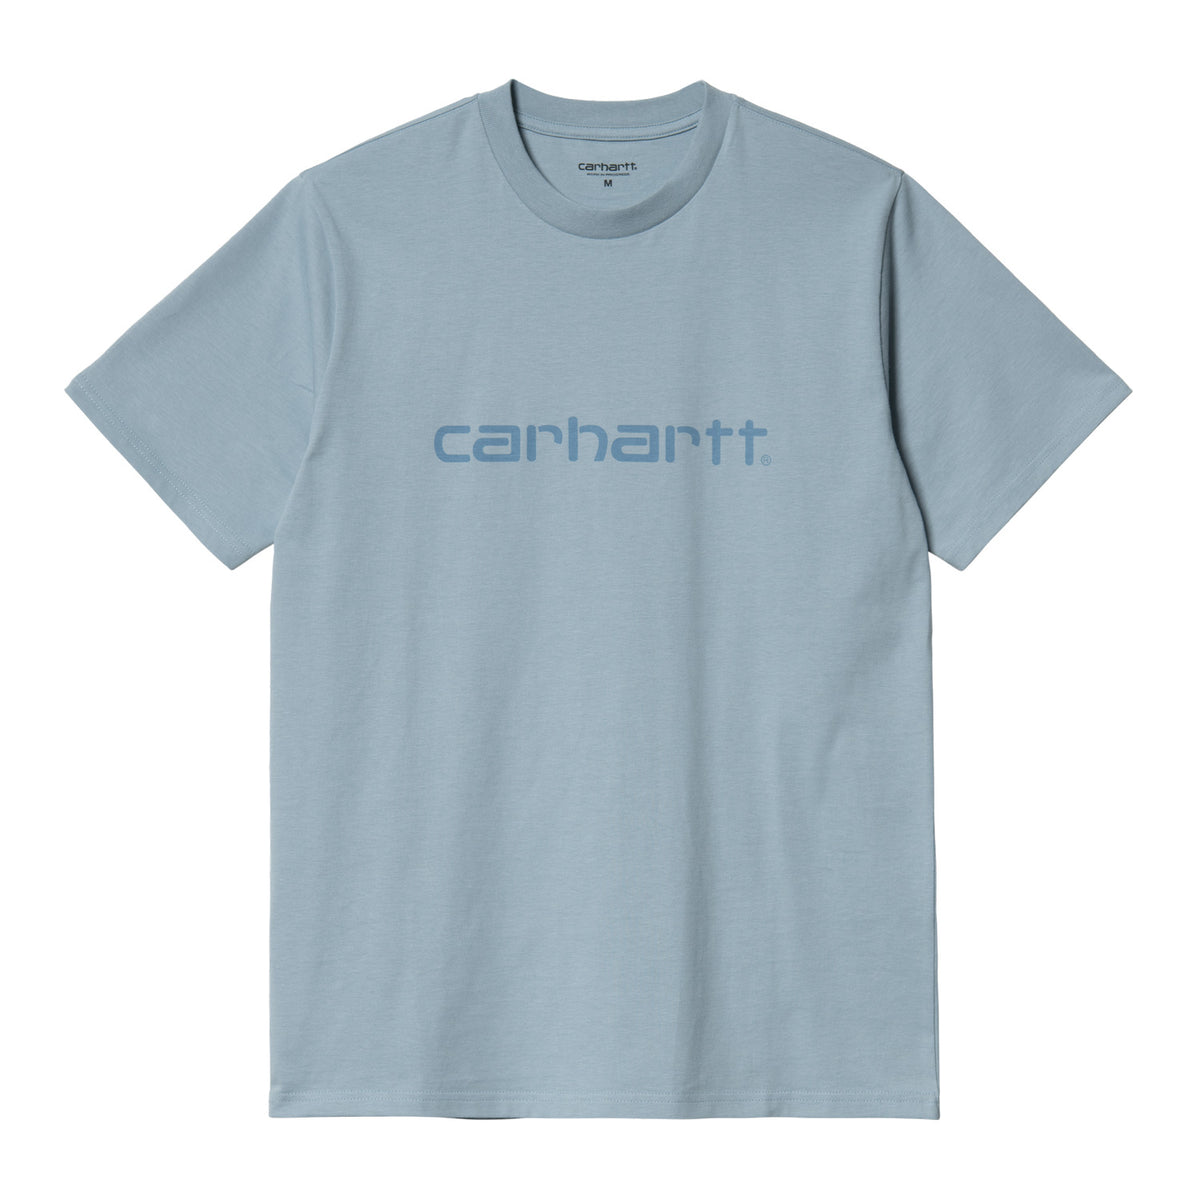 Carhartt S/S Script T-Shirt - Frosted Blue/Icy Water